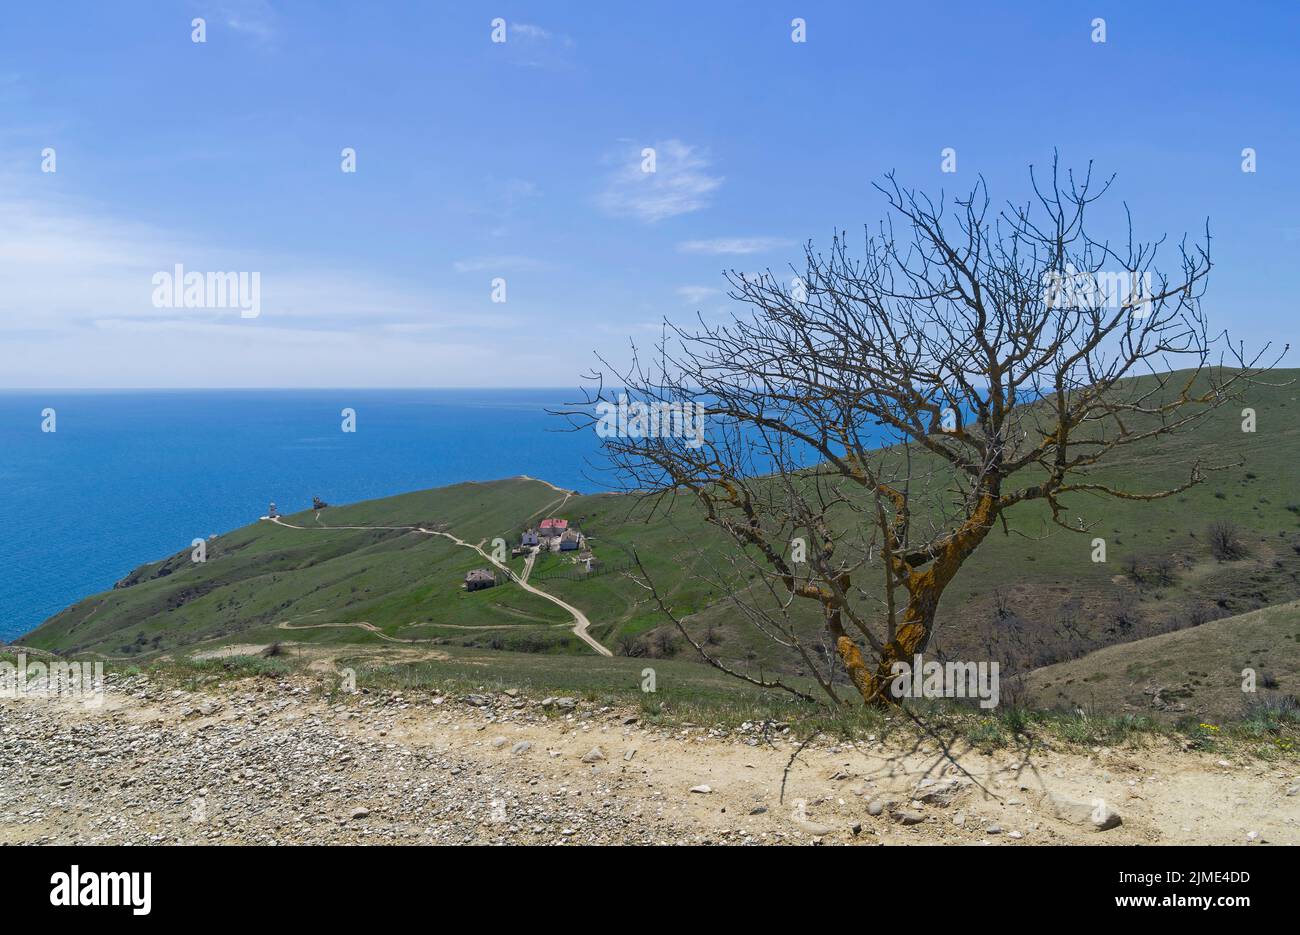 A dirt road running along a deserted mountainside on the seashore. Stock Photo